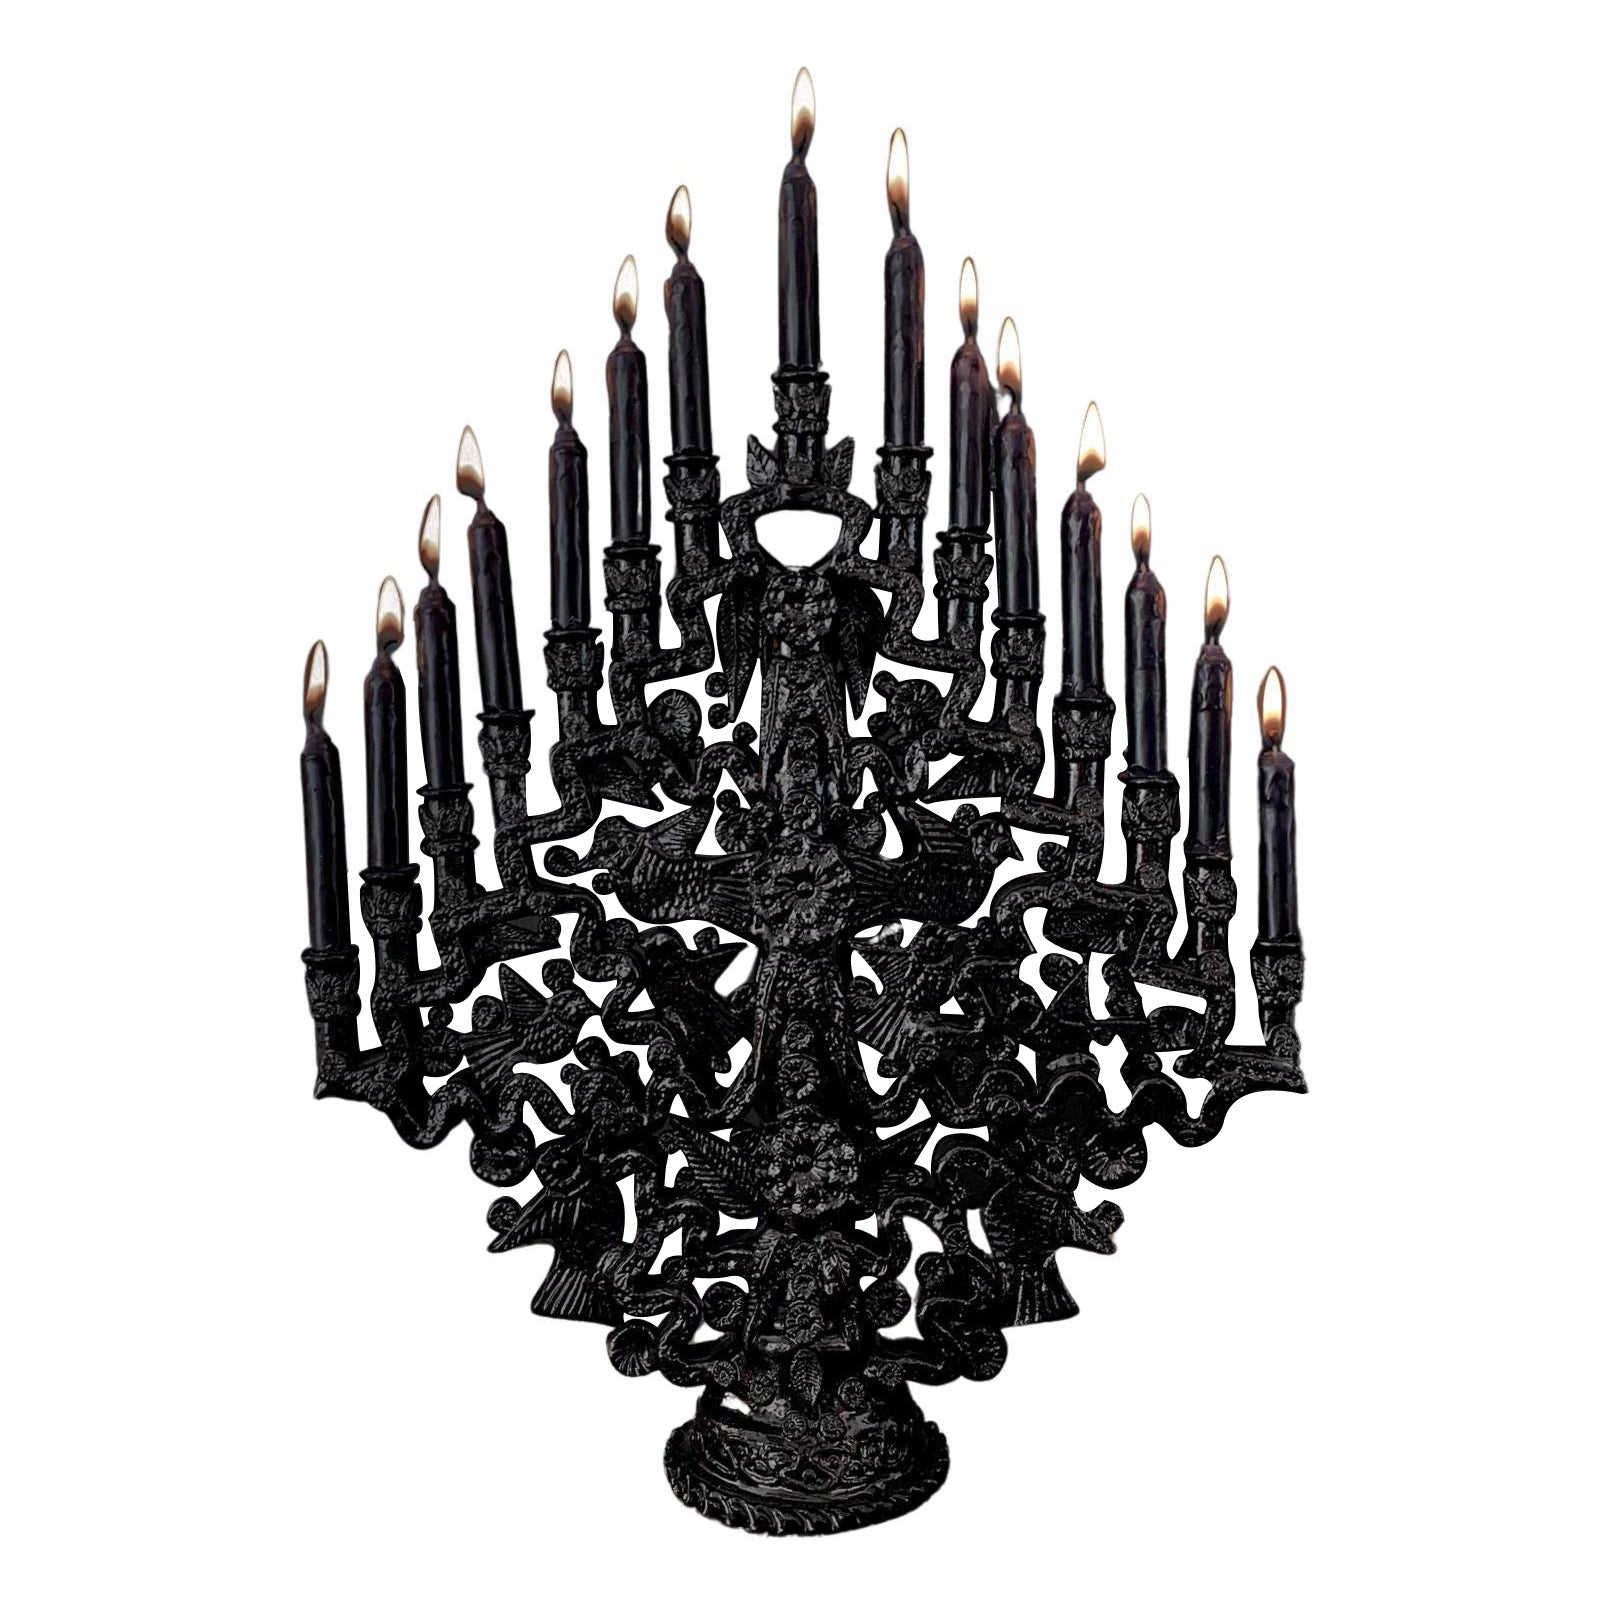 Santa Fe Candleholder by Onora For Sale